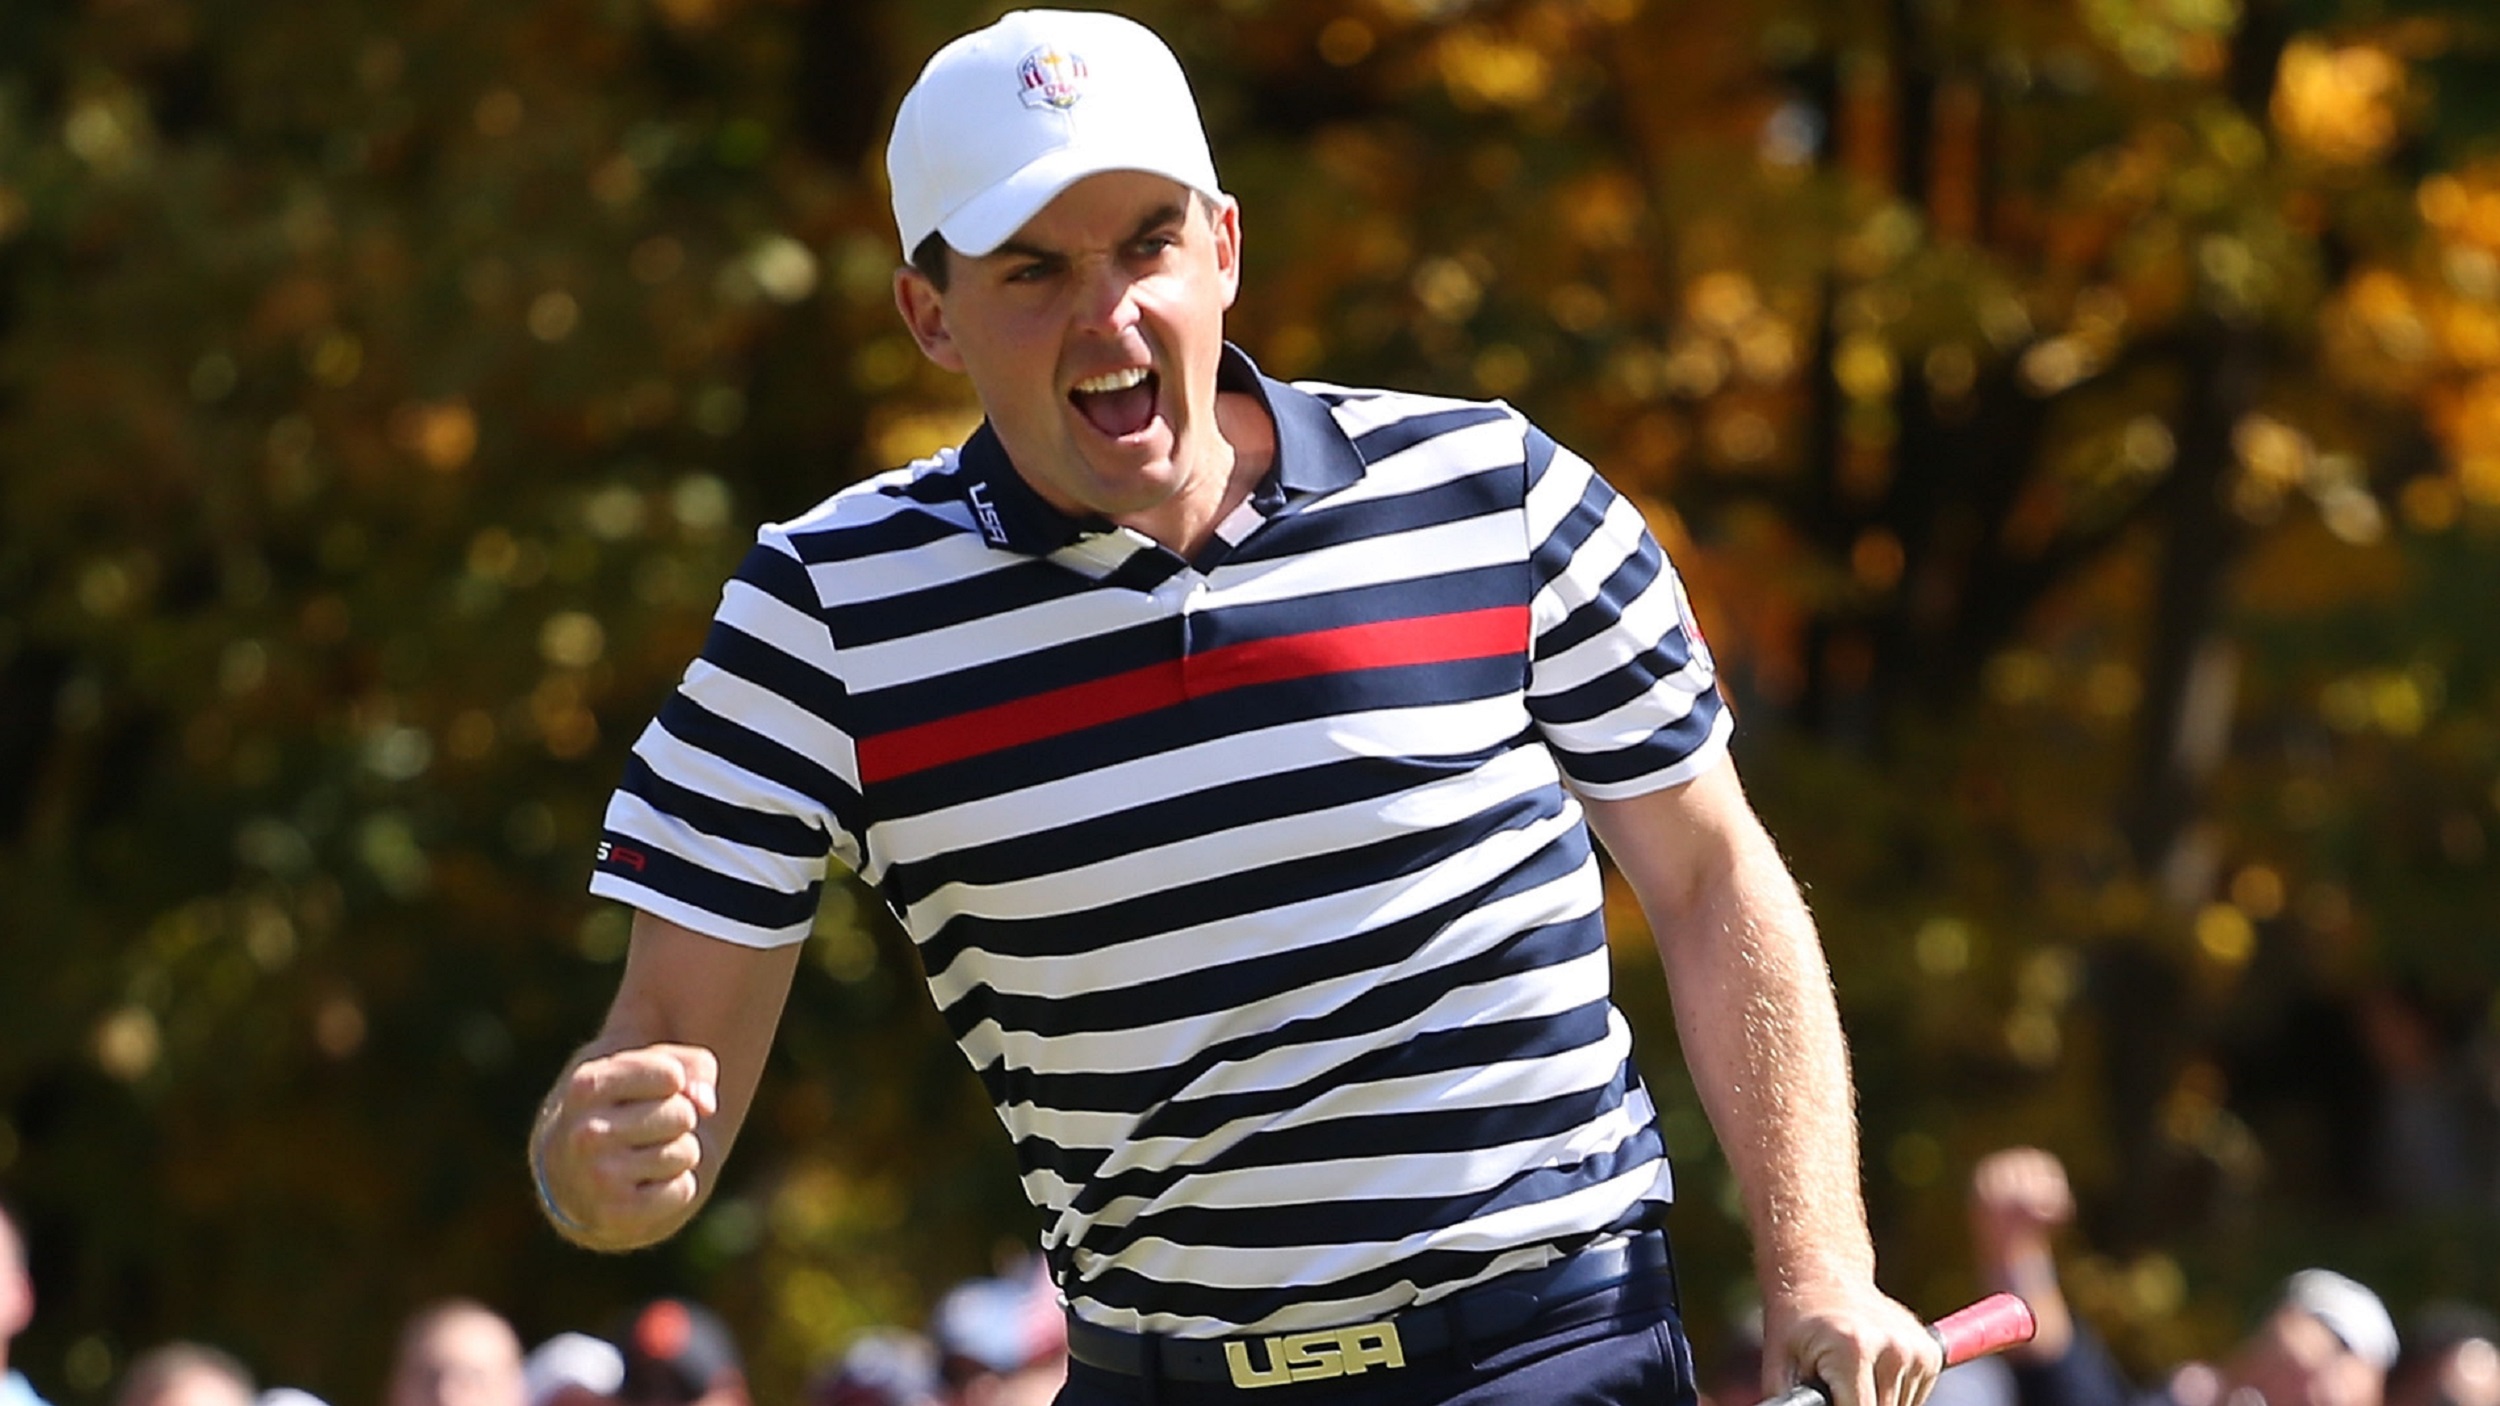 Keegan Bradley After Ryder Cup Snub: ‘Moving Forward, I’m Going to Have to Automatically Qualify’